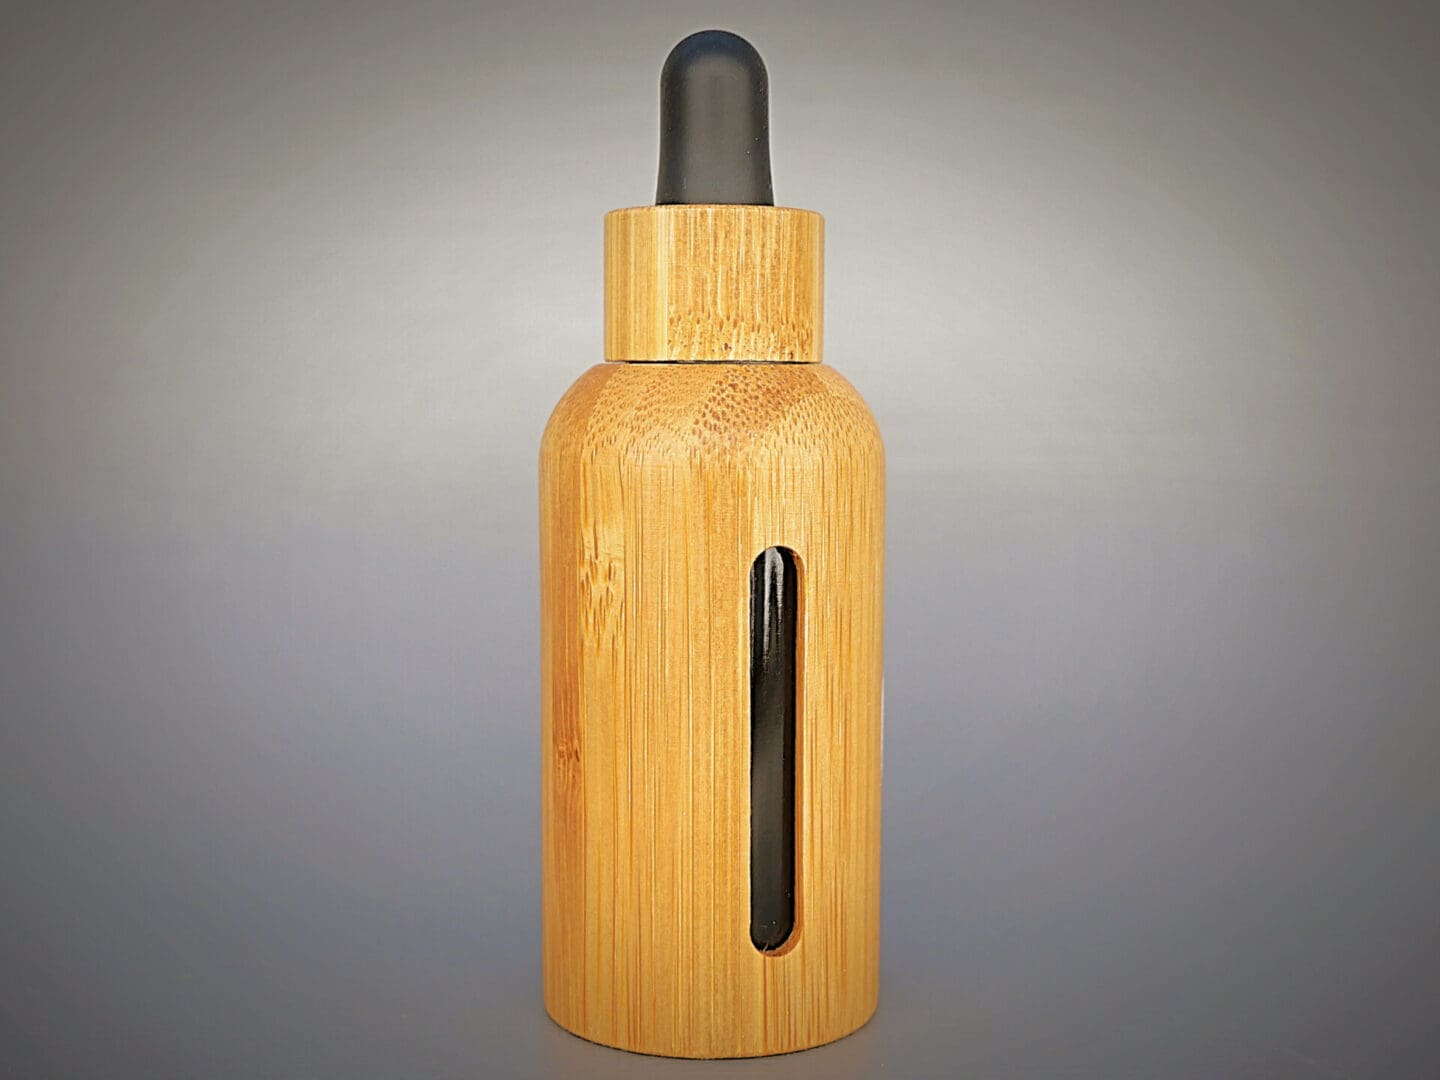 A wooden bottle with a black lid.